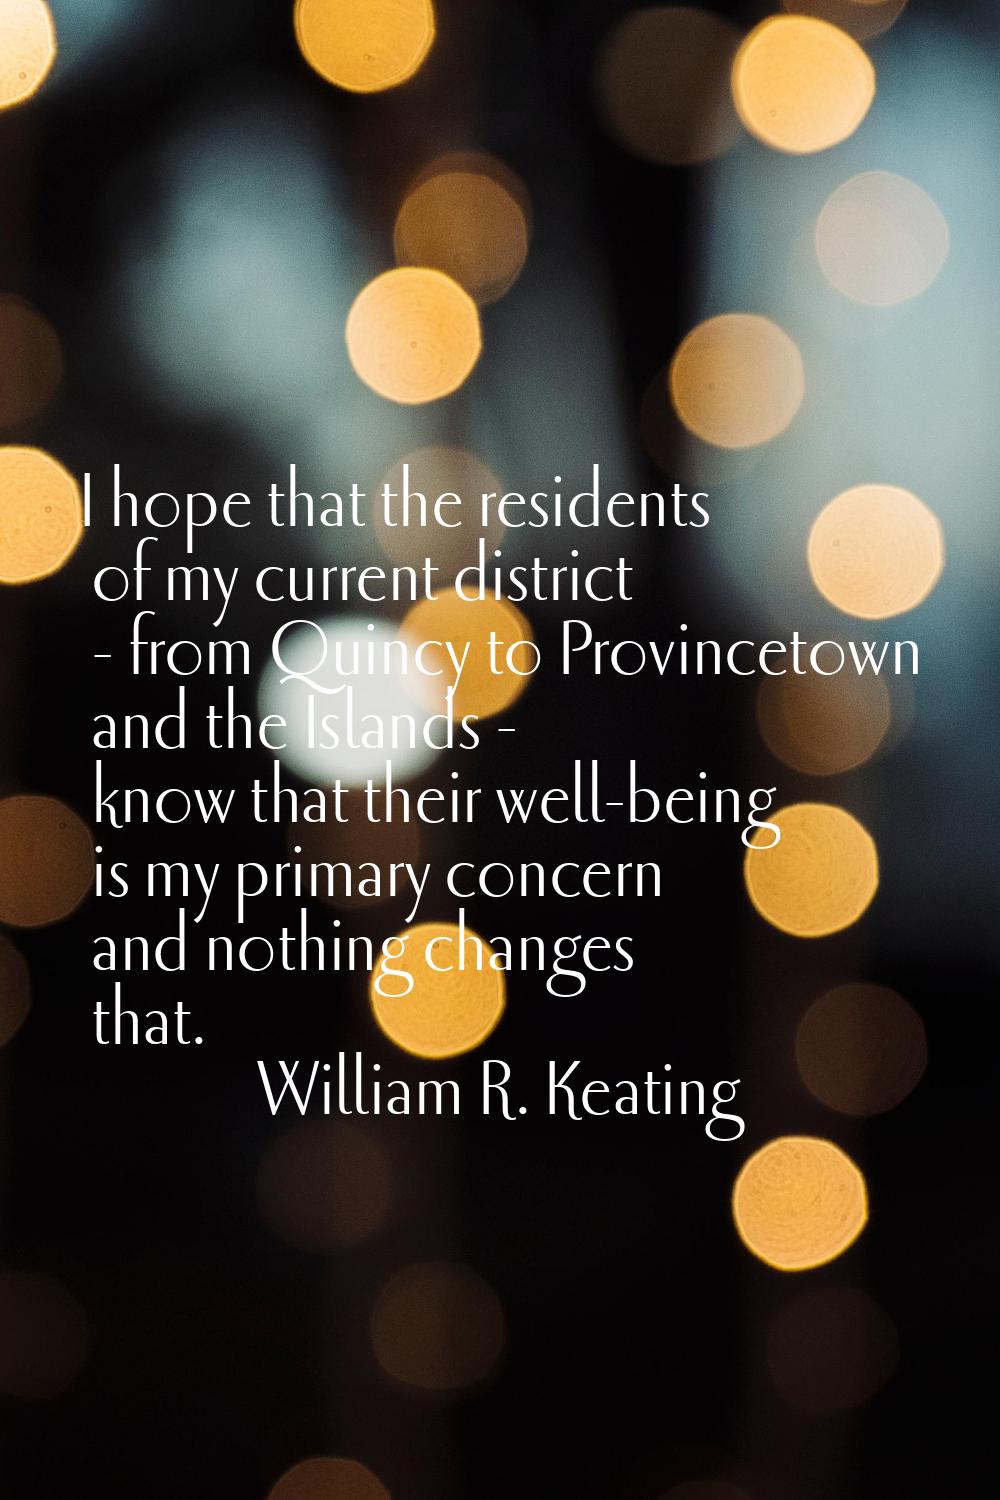 I hope that the residents of my current district - from Quincy to Provincetown and the Islands - kn